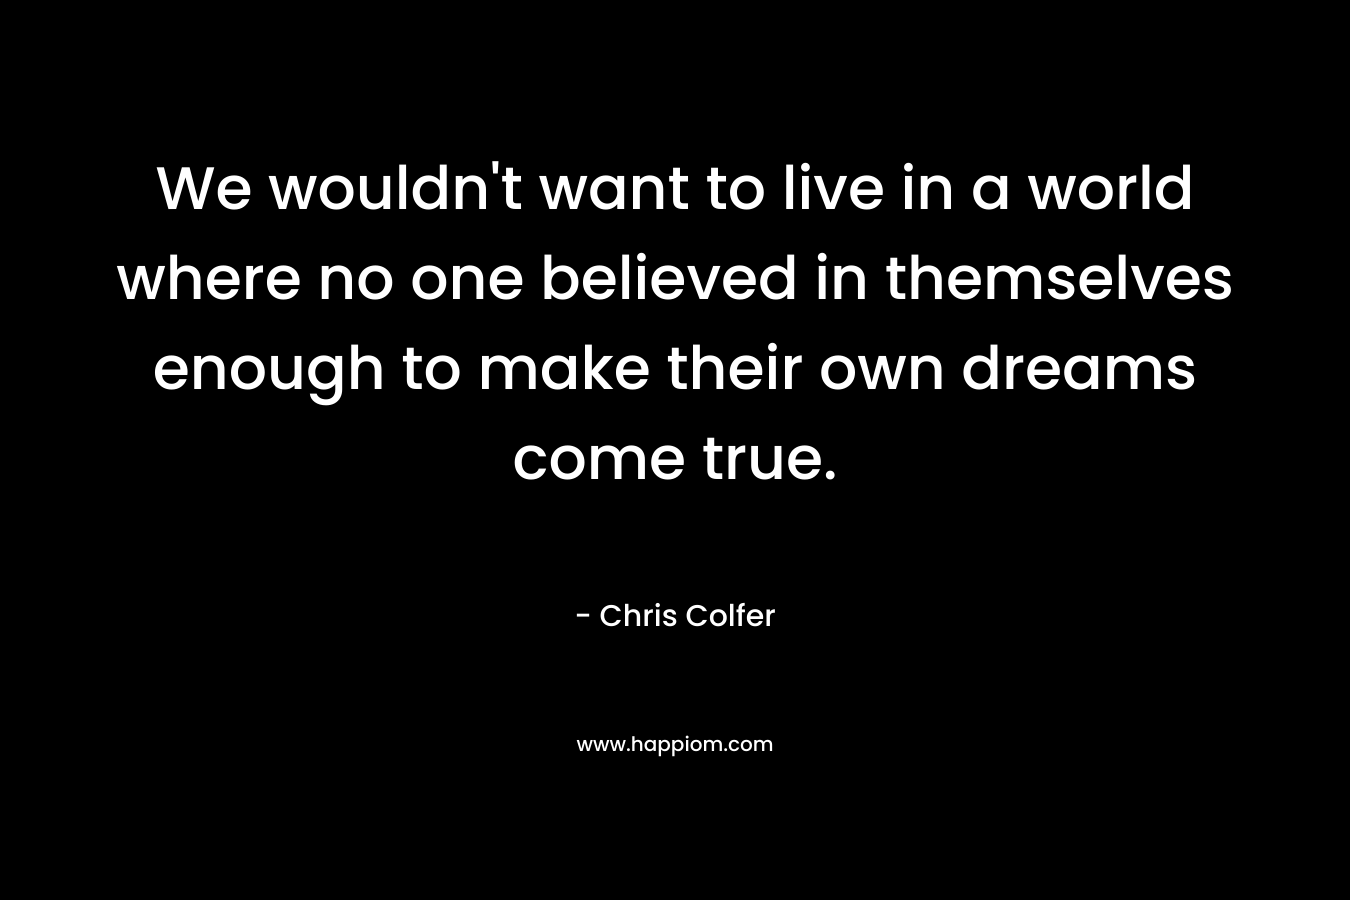 We wouldn't want to live in a world where no one believed in themselves enough to make their own dreams come true.